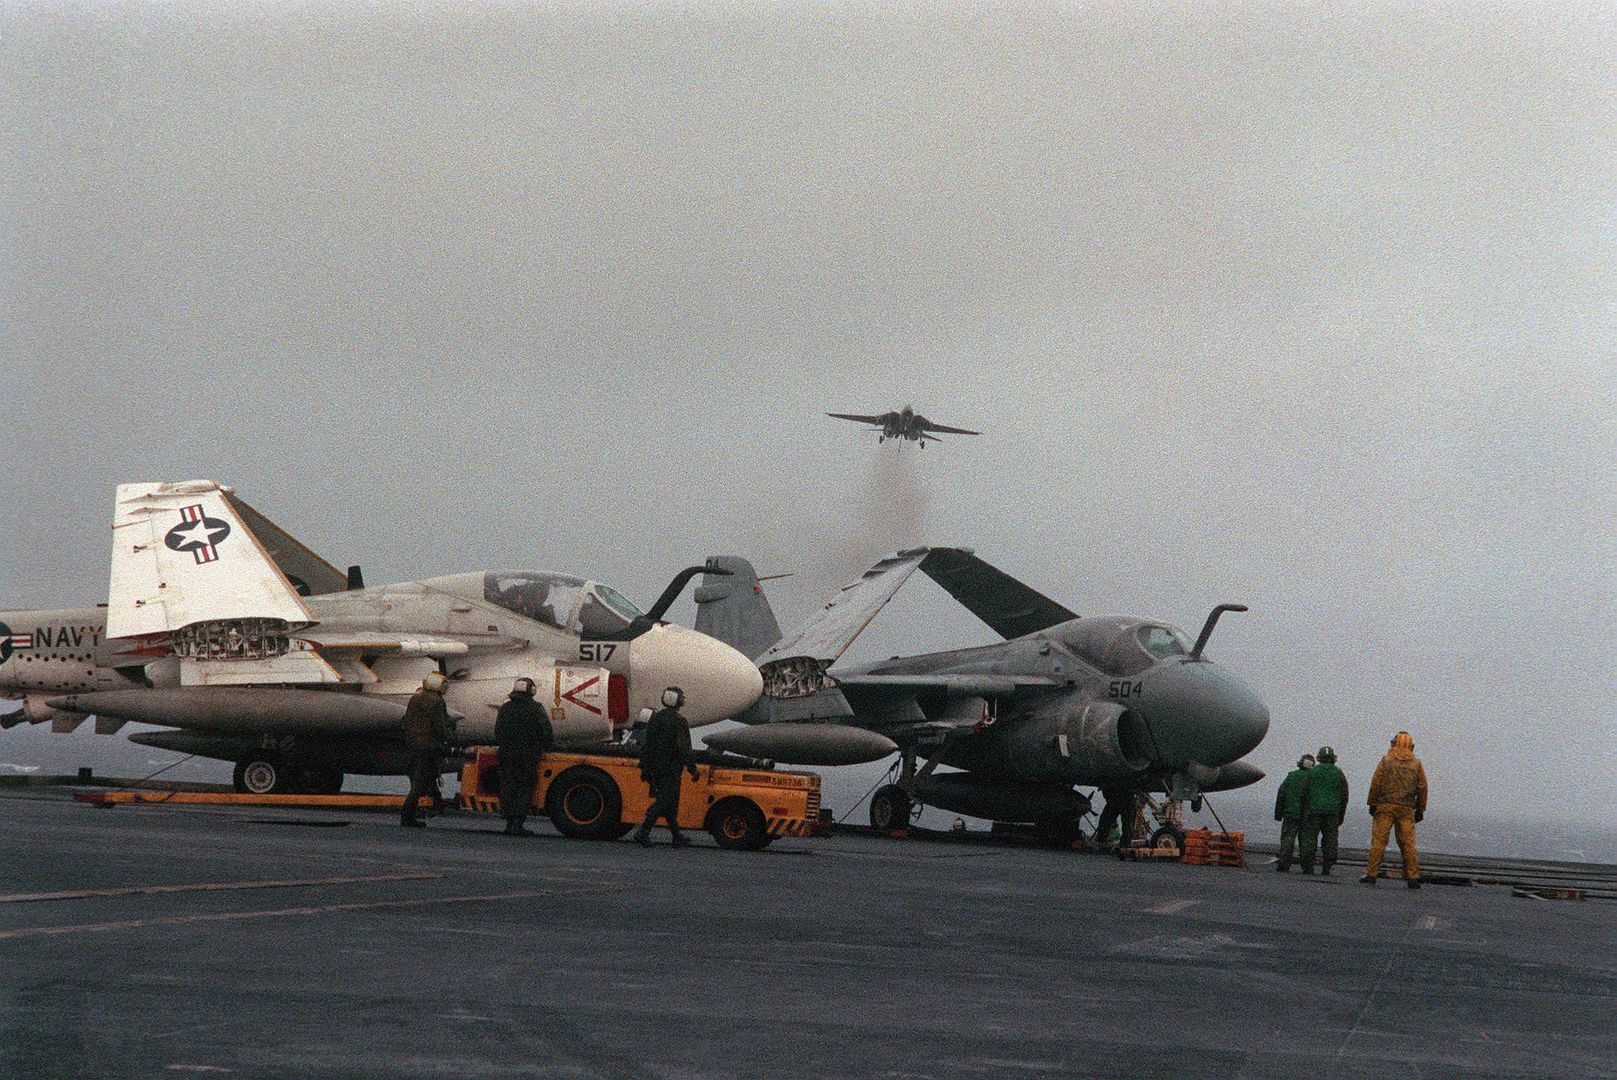 A KA 6D Intruder Aircraft Left And An A 6E Intruder Aircraft Are Serviced On The Flight Deck Of The Aircraft Carrier USS FORRESTAL In The North Atlantic Ocean During Exercise TEAM WORK 88